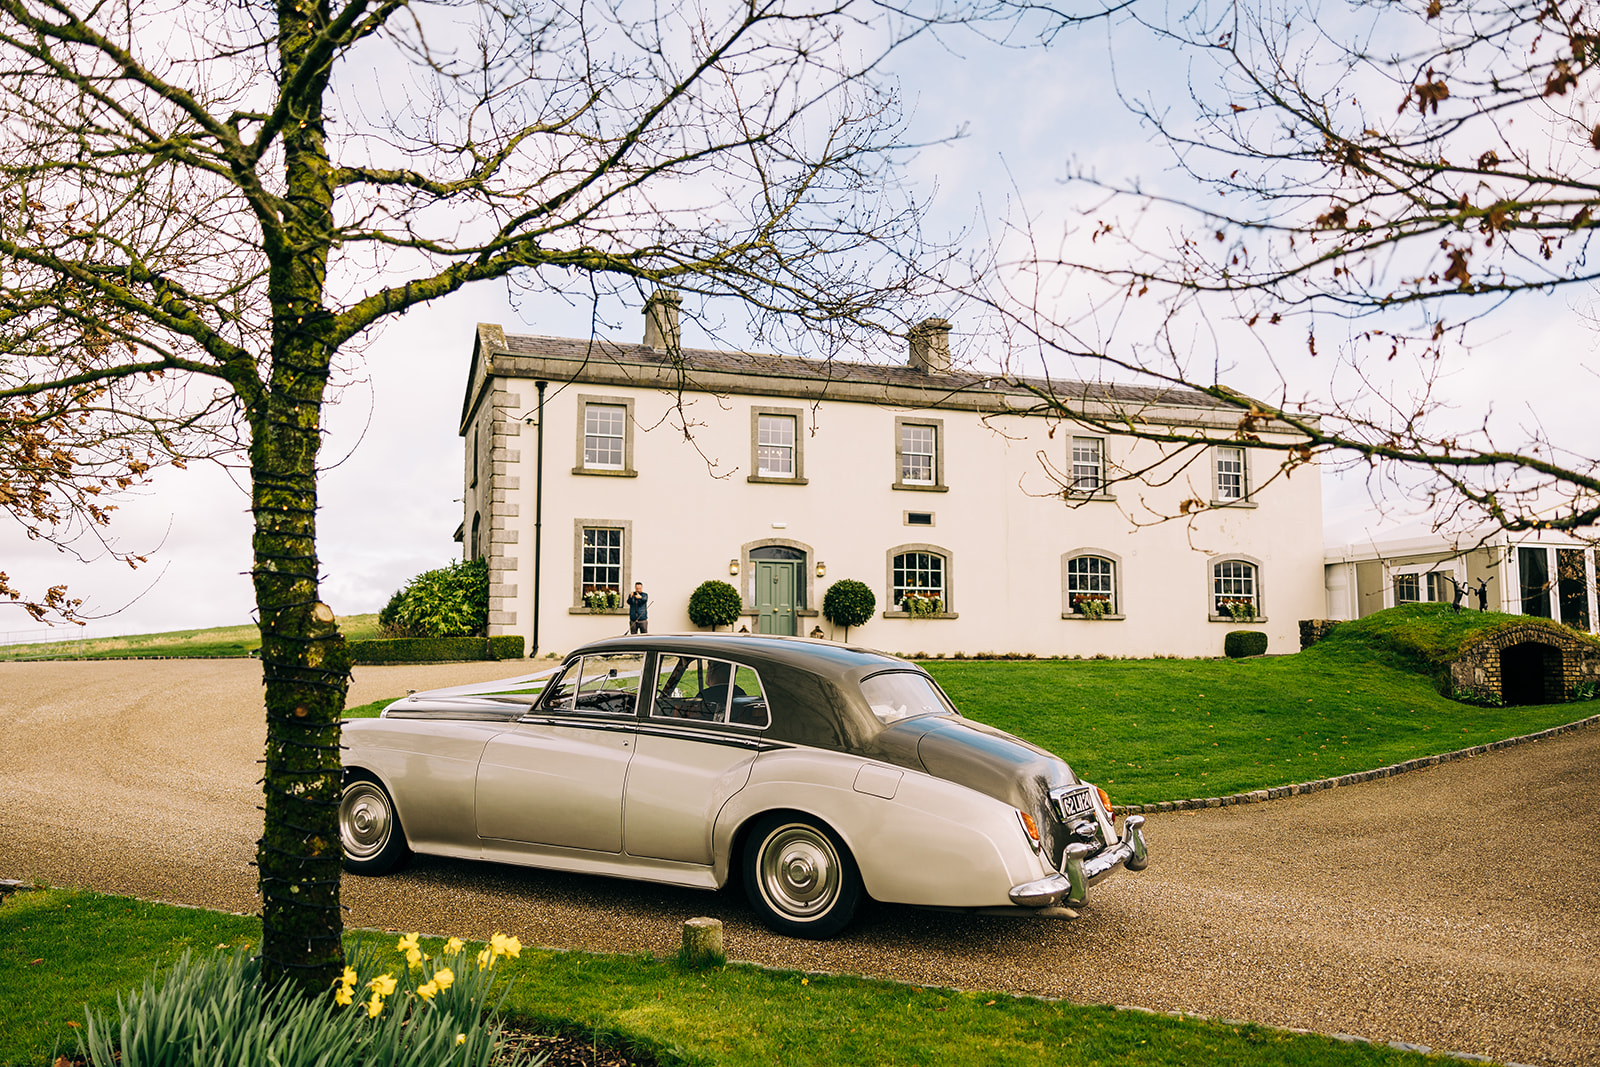 The bride and groom arriving to Clonabreany House in the wedding car